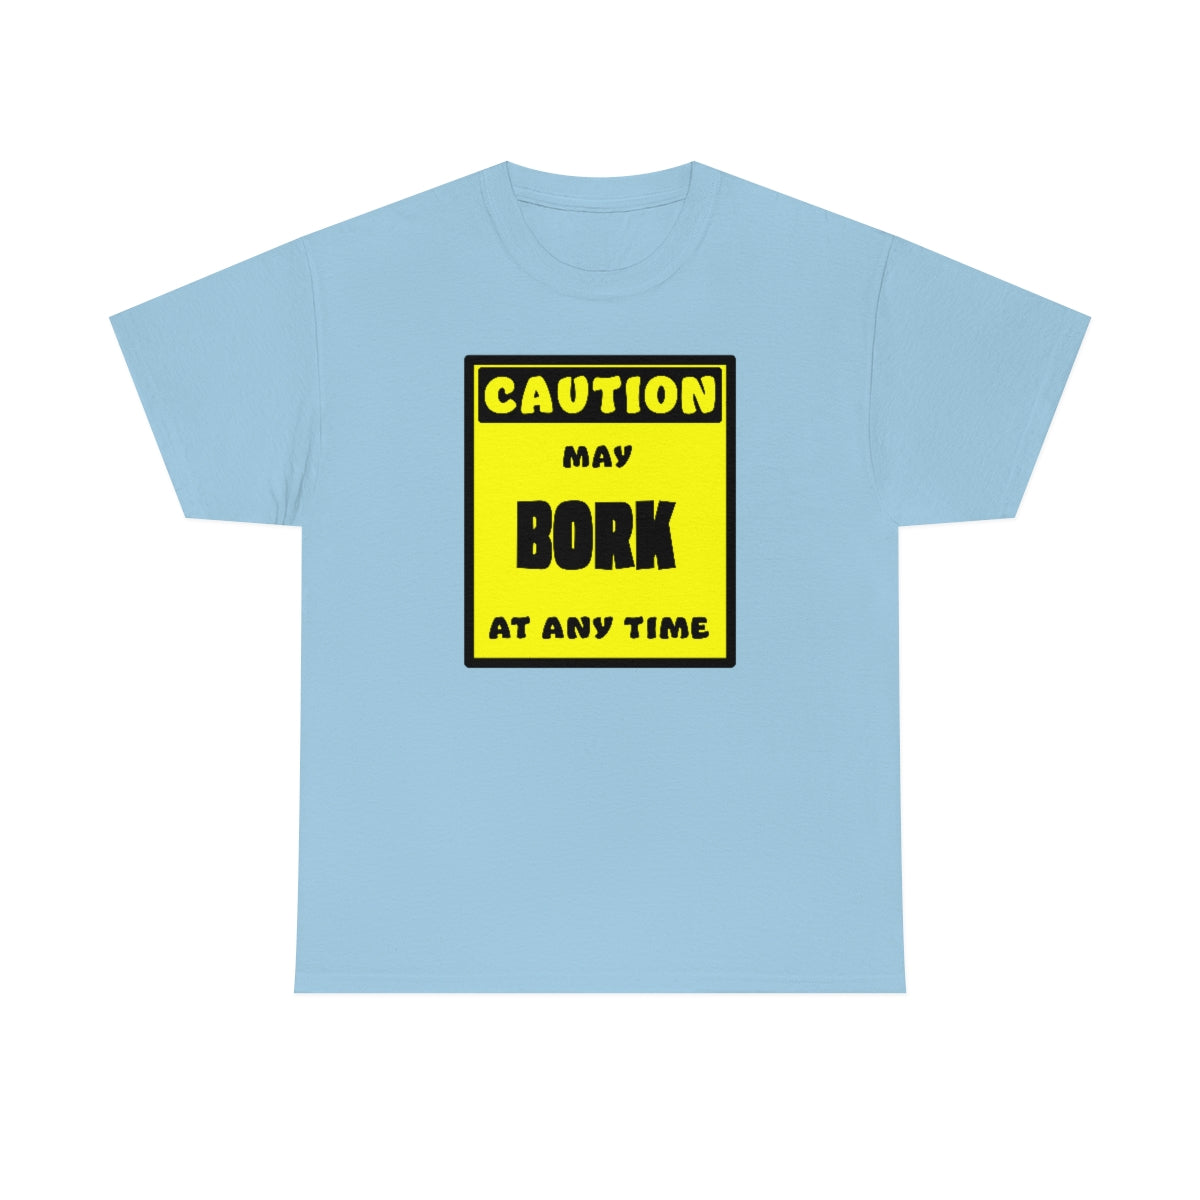 CAUTION! May BORK at any time! - T-Shirt T-Shirt AFLT-Whootorca Light Blue S 